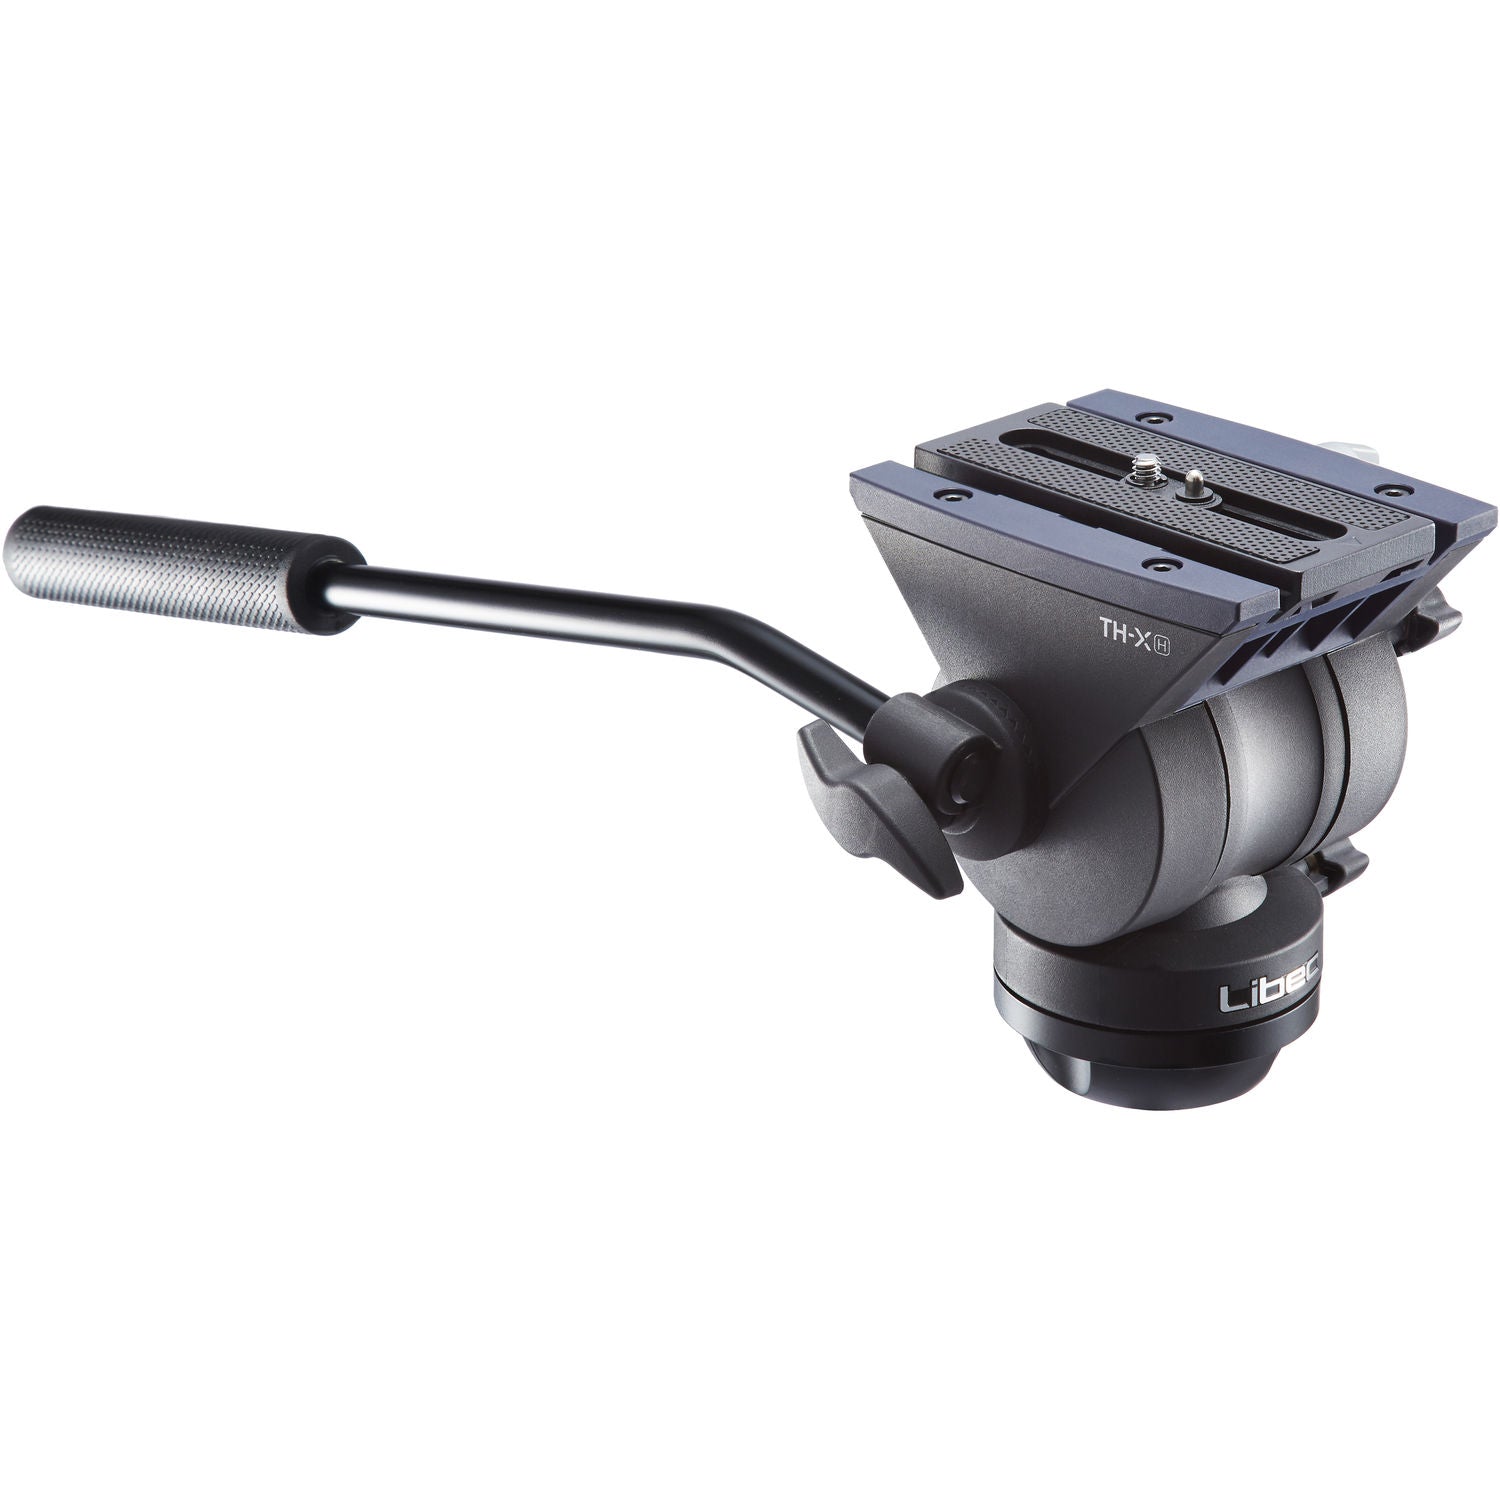 Libec 65mm ball and flat base video head with a pan handle, payload 4kg